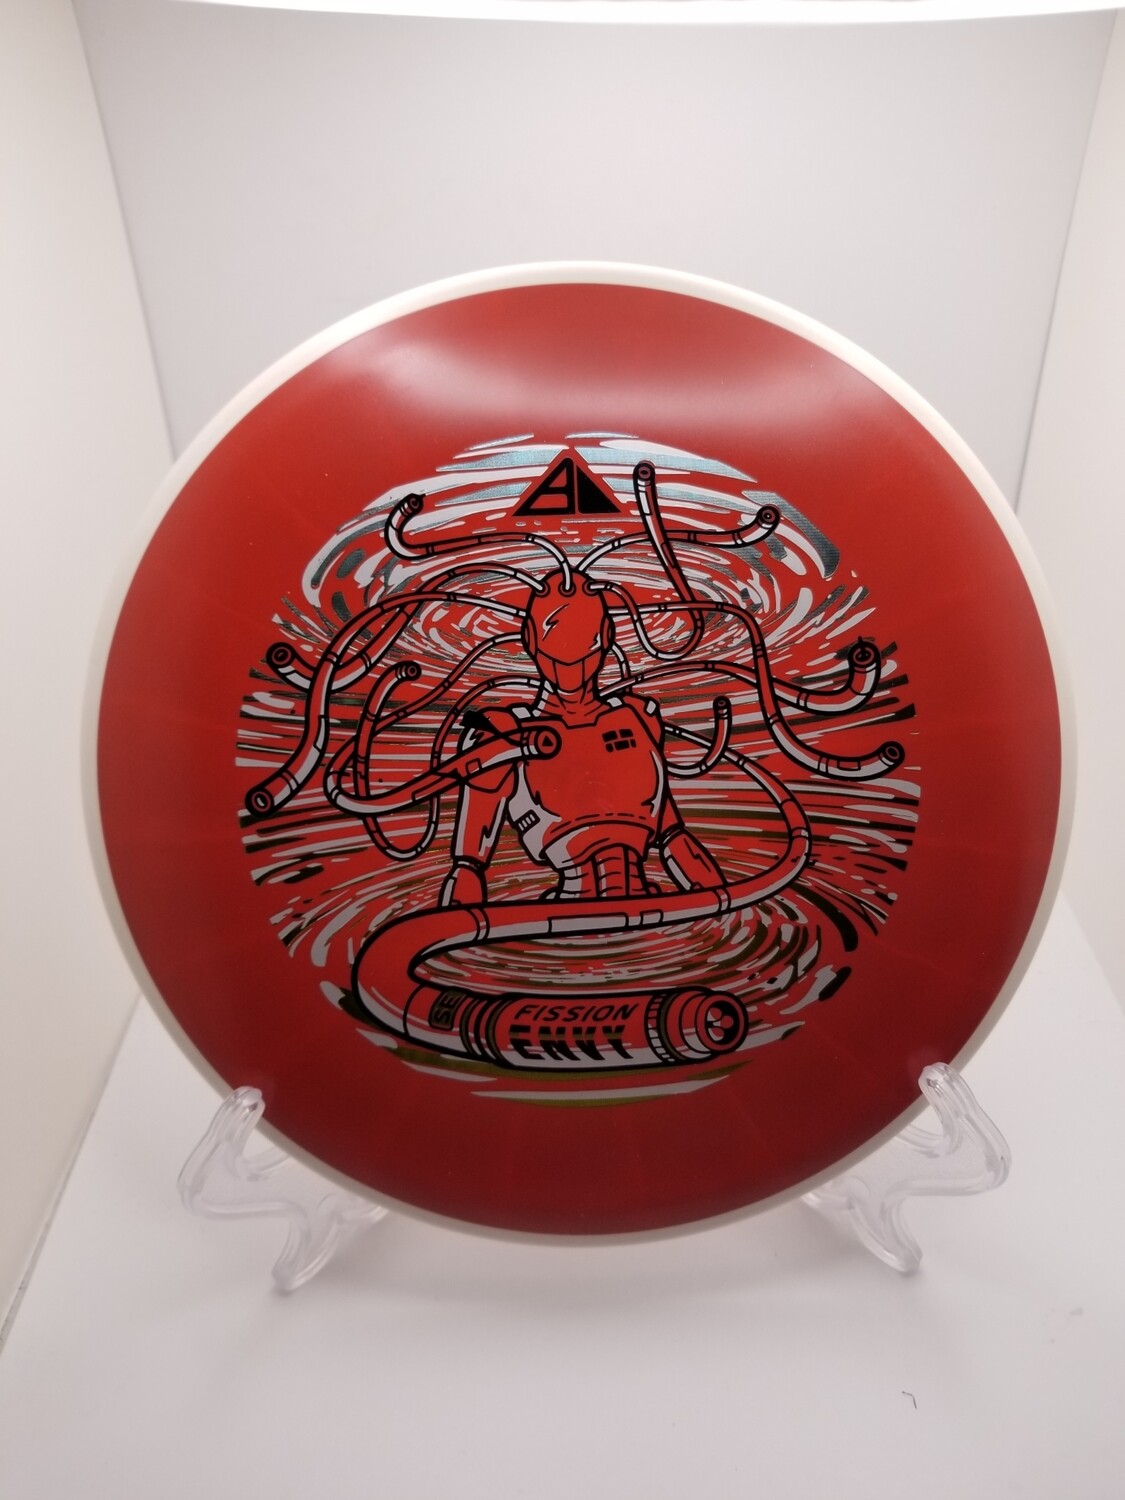 Axiom Discs Envy Special Edition Fission Envy Red with White Rim 172g